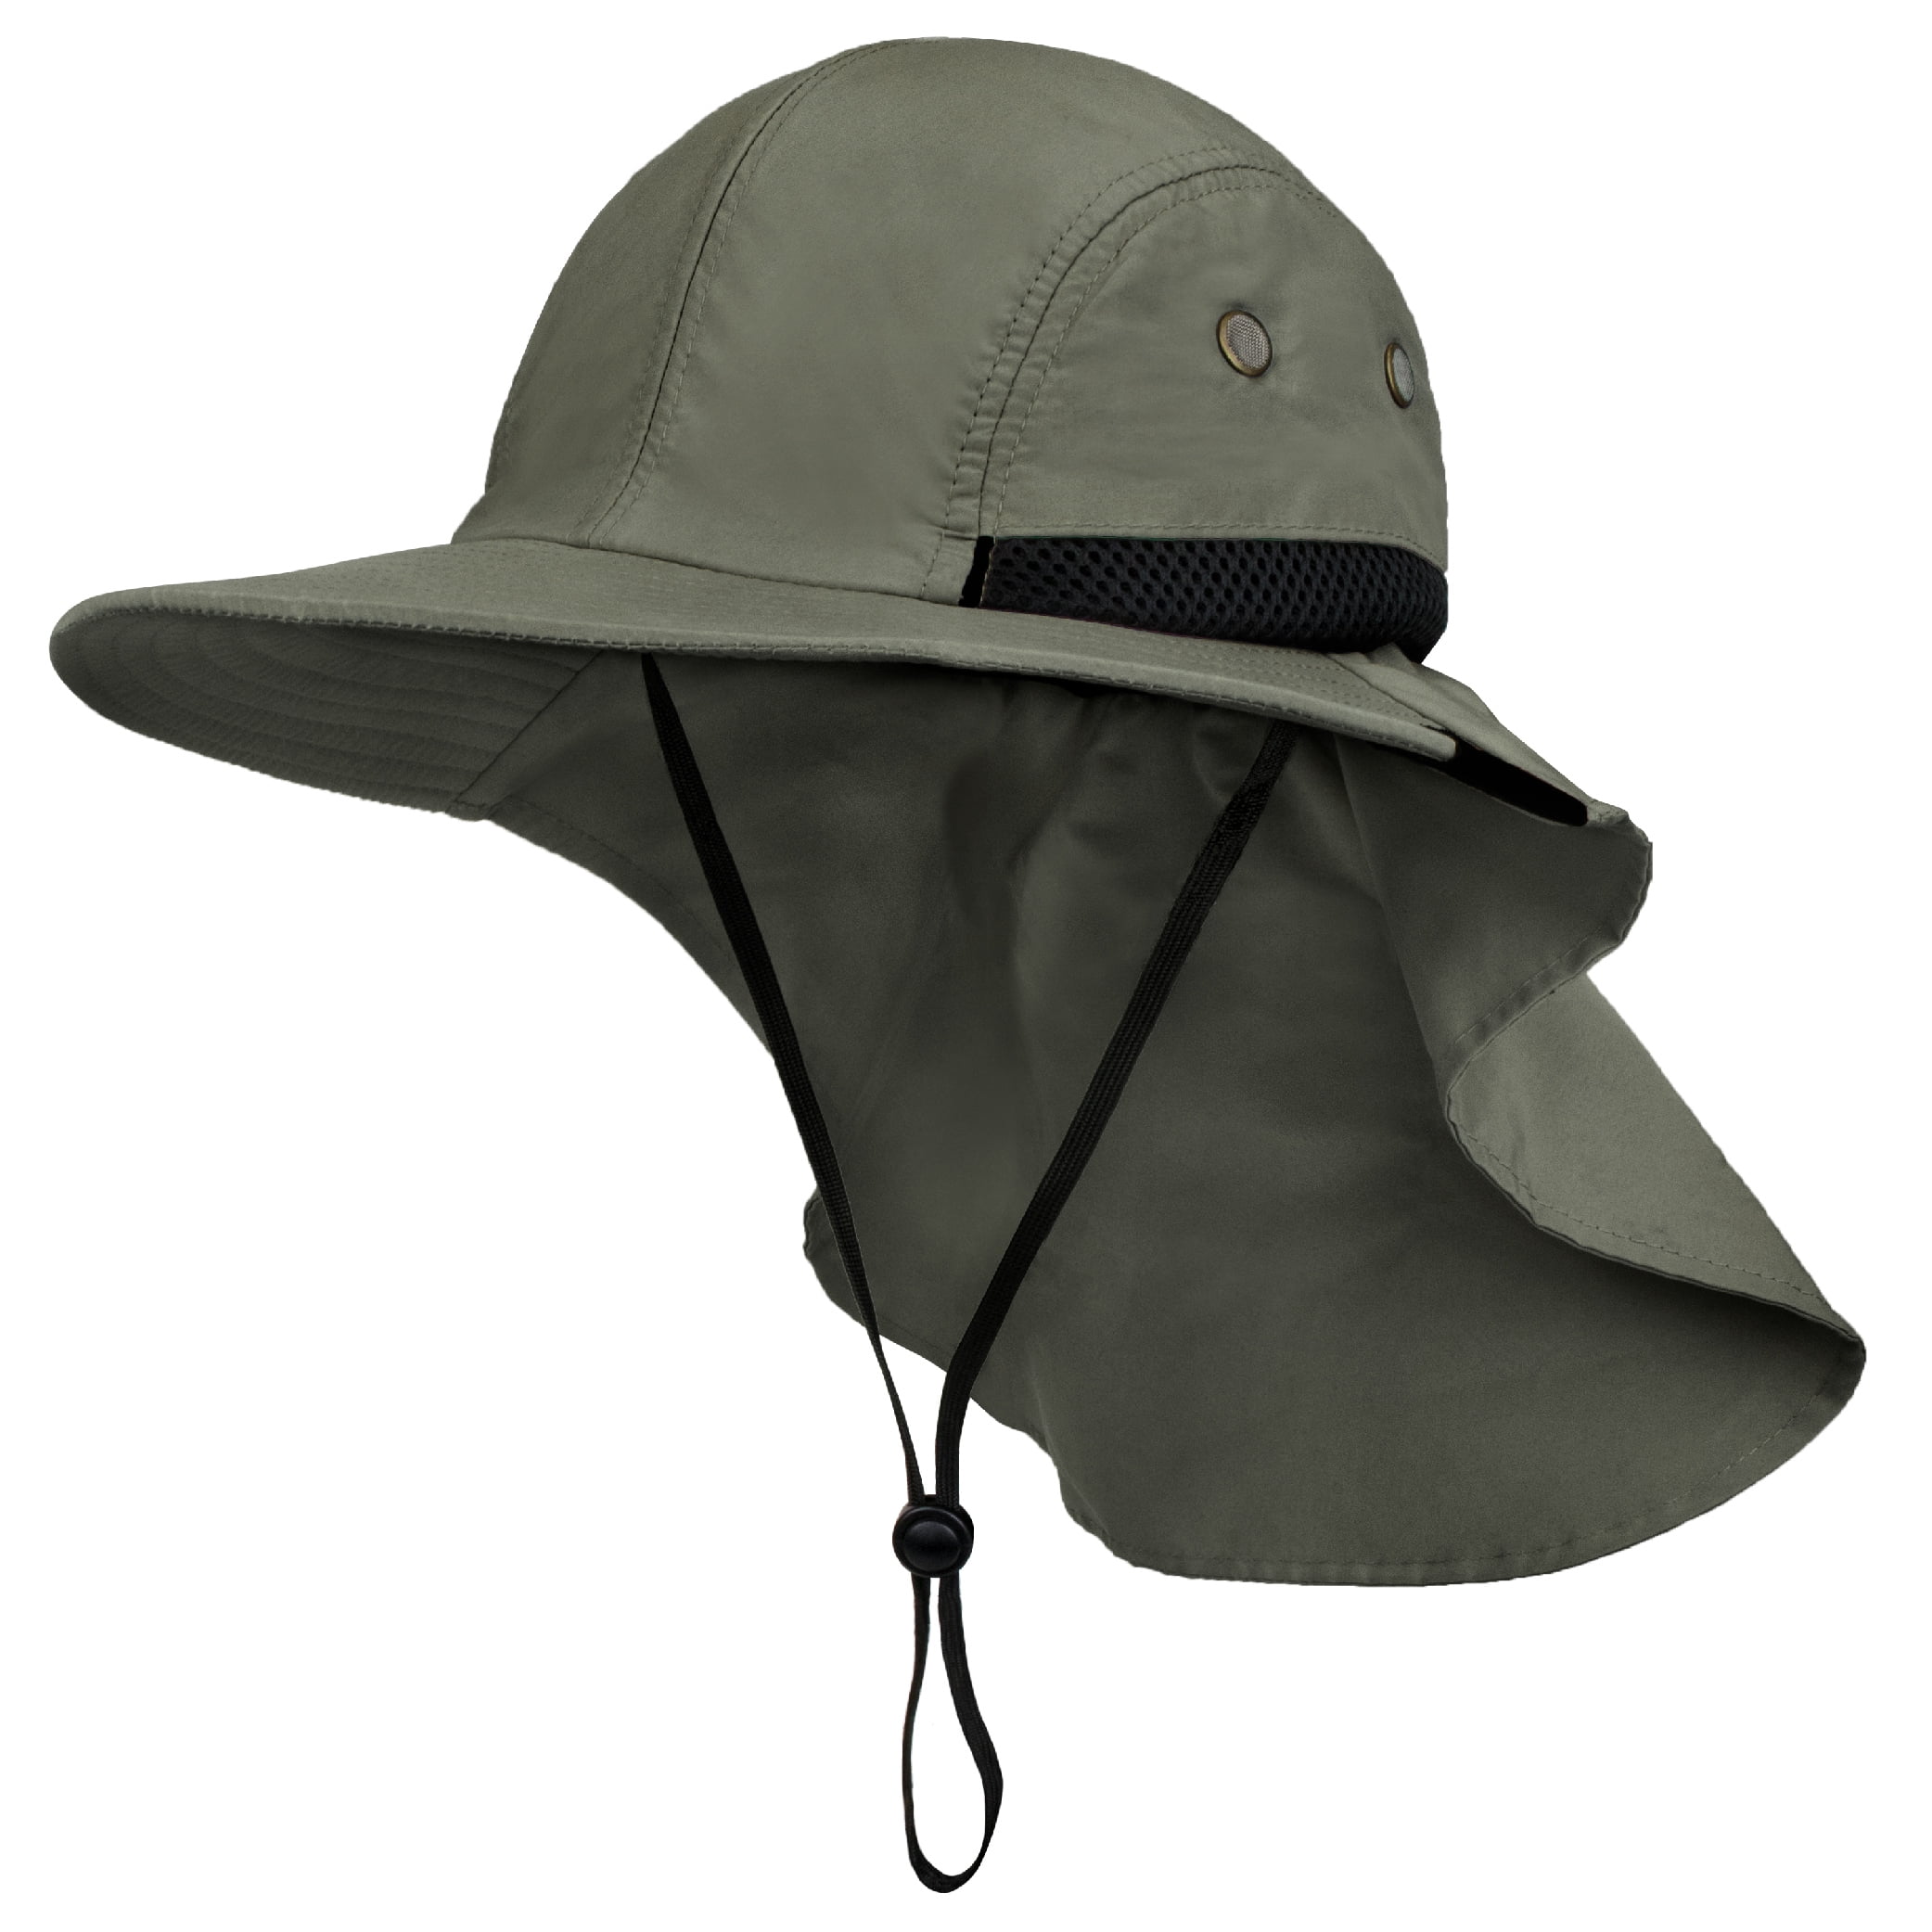 FLYEARTH UPF 50 Sun Fishing Hat for Men Women Wide Brim Hat with Detachable Face Cover Neck Flap Army Camo, Camo